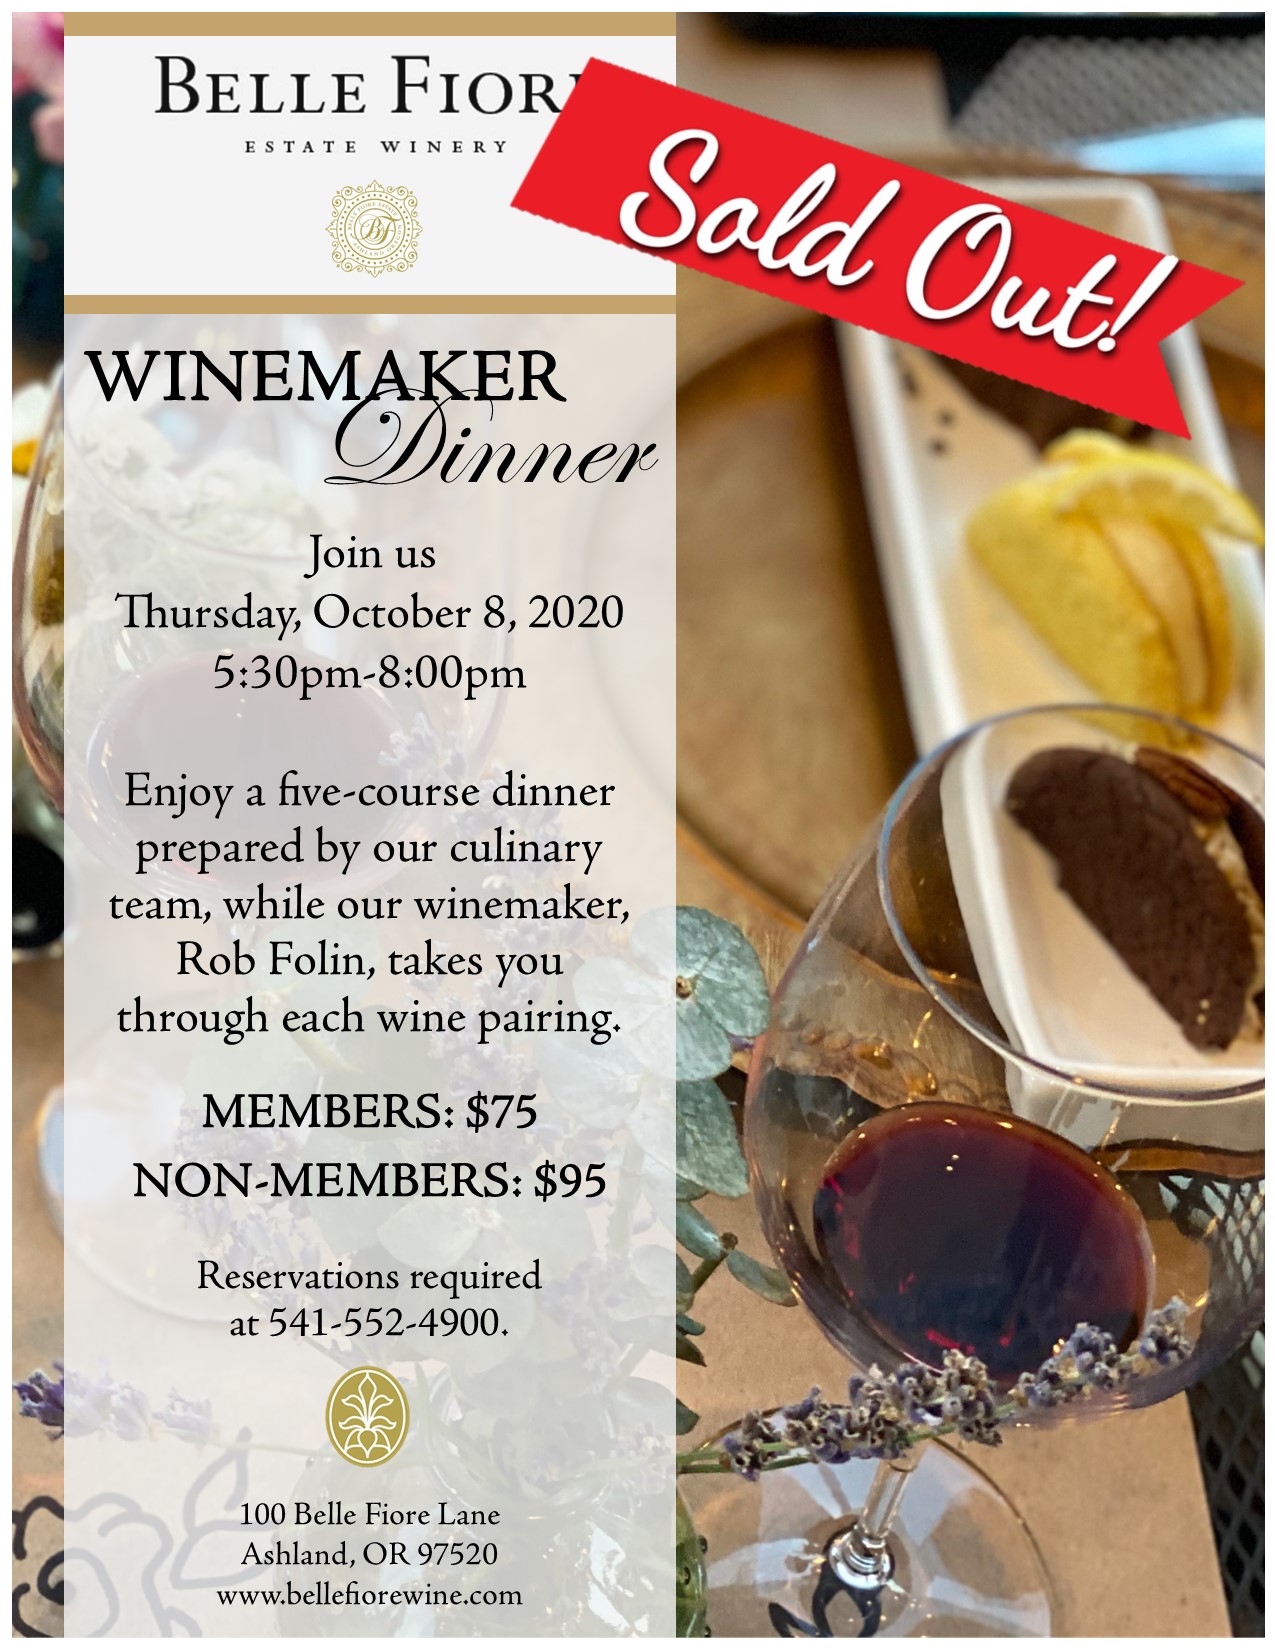 Winemaker Dinner - SOLD OUT - Belle Fiore Winery & Vineyard